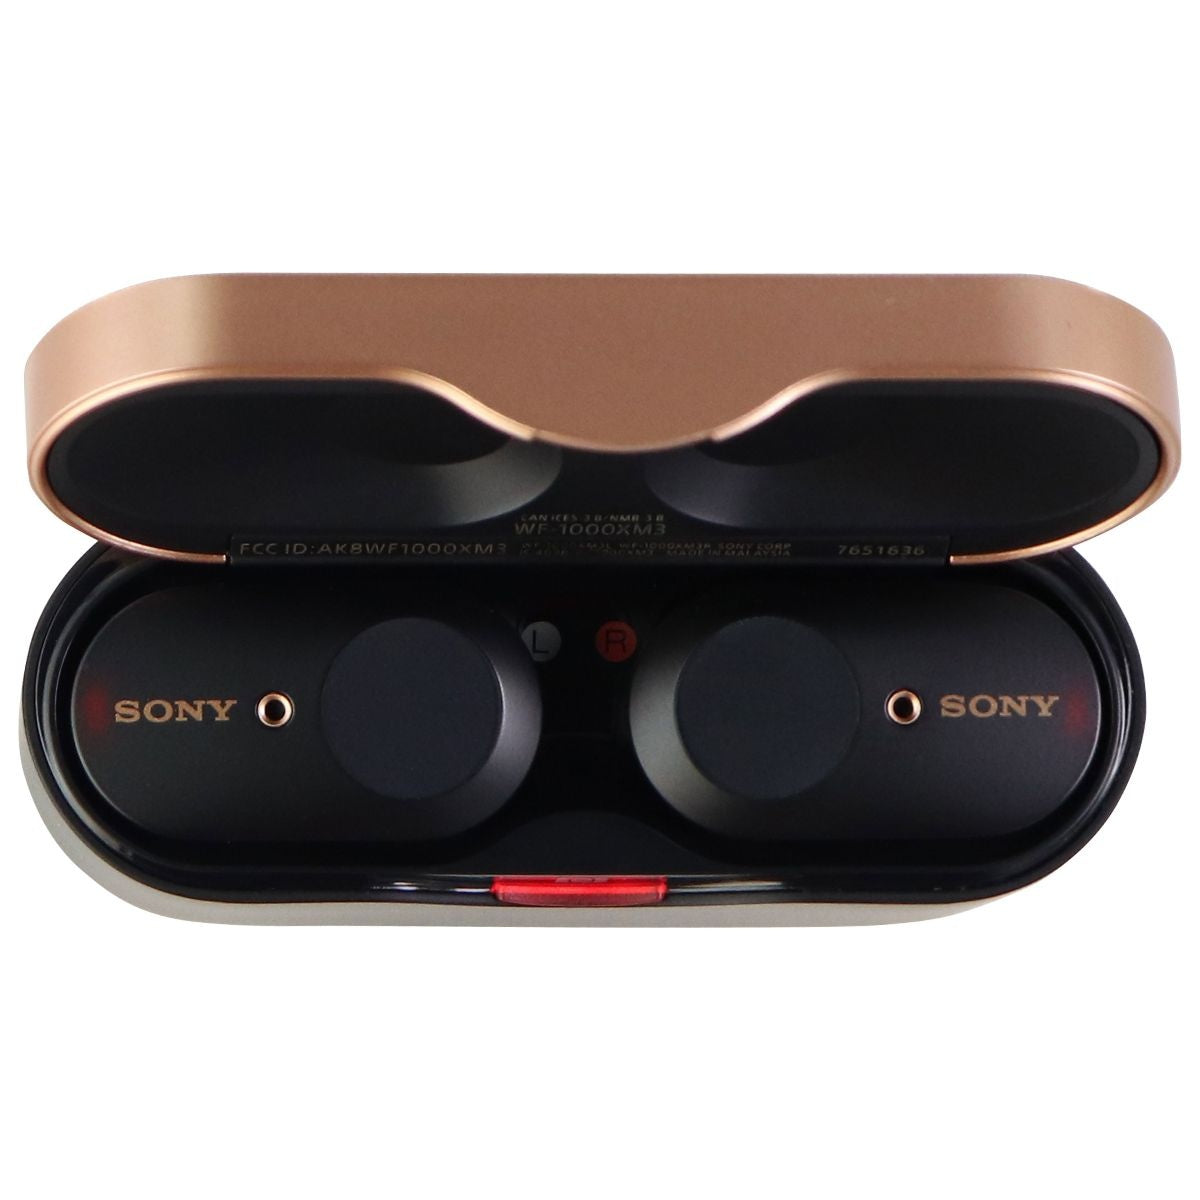 Sony WF-1000XM3 Noise Canceling Wireless Earbuds & Charge Case - Black Portable Audio - Headphones Sony    - Simple Cell Bulk Wholesale Pricing - USA Seller